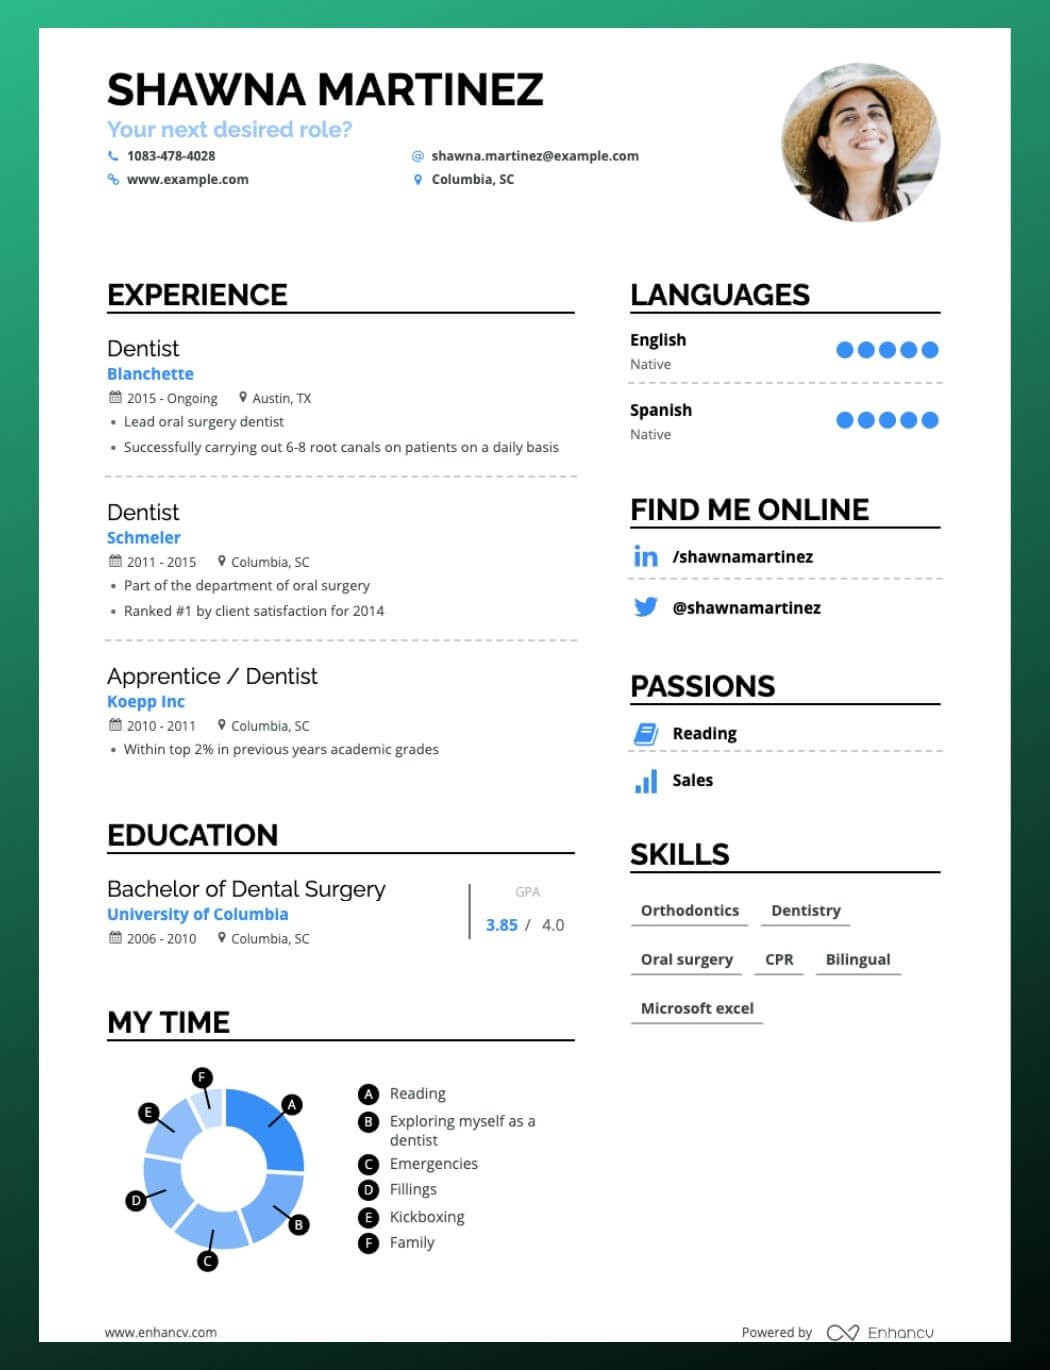 Resume Samples with Skills and Abilities How to Create A Resume Skills Section to Impress Recruiters (lancarrezekiq10 …